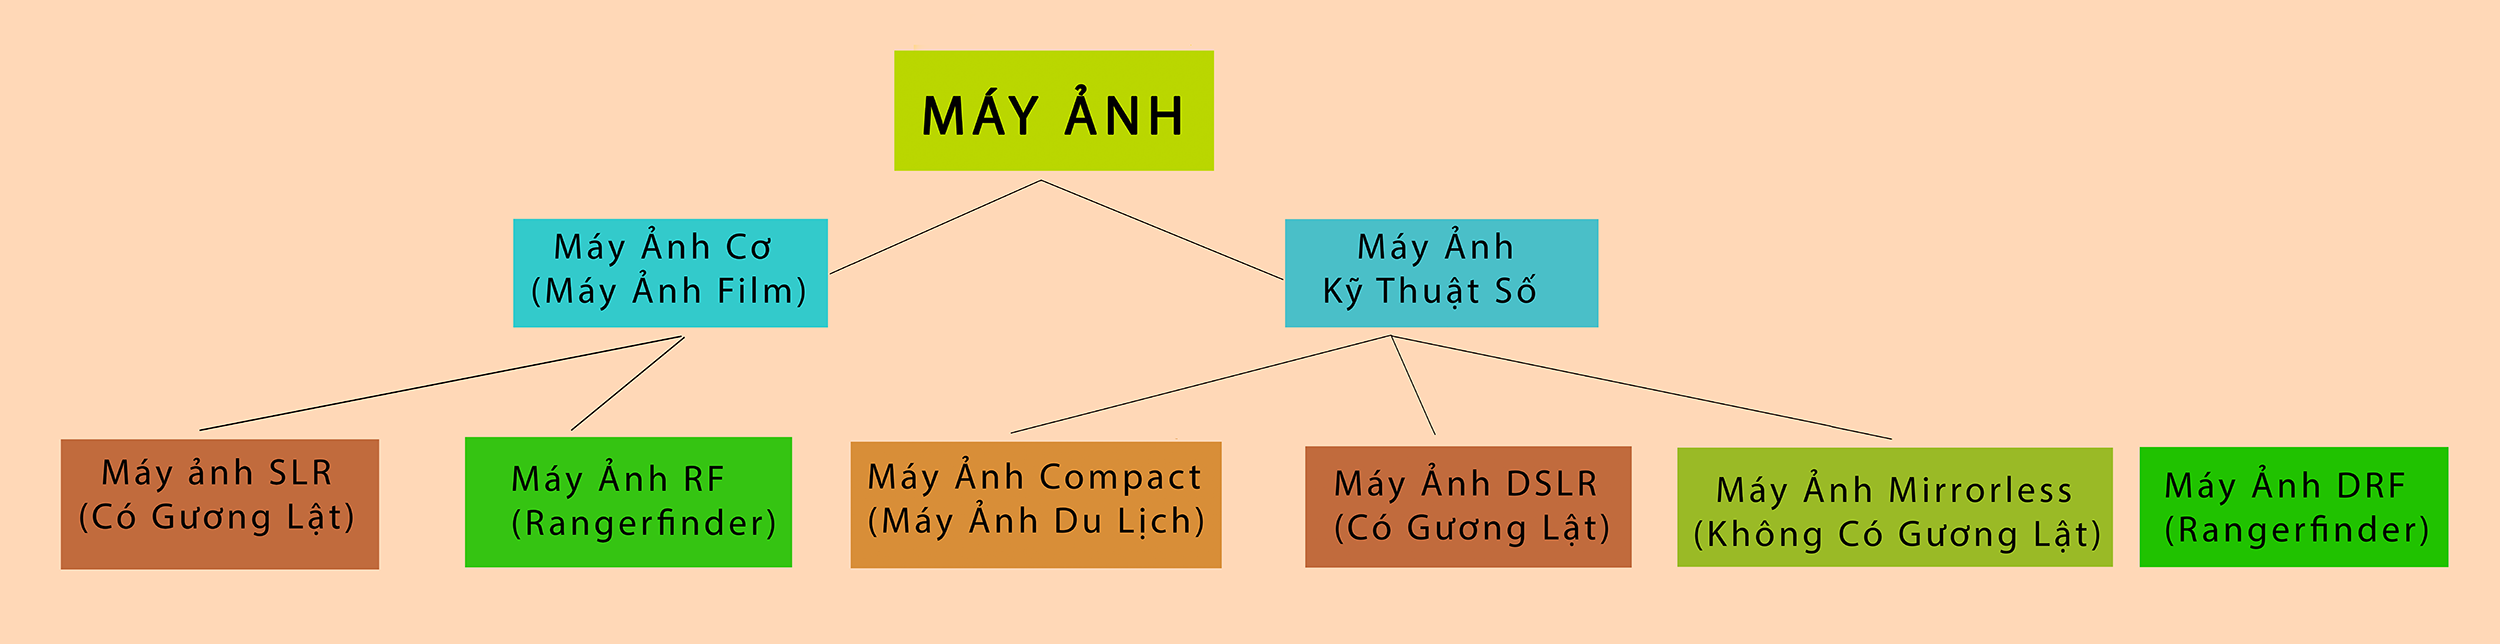 may-anh-co-1